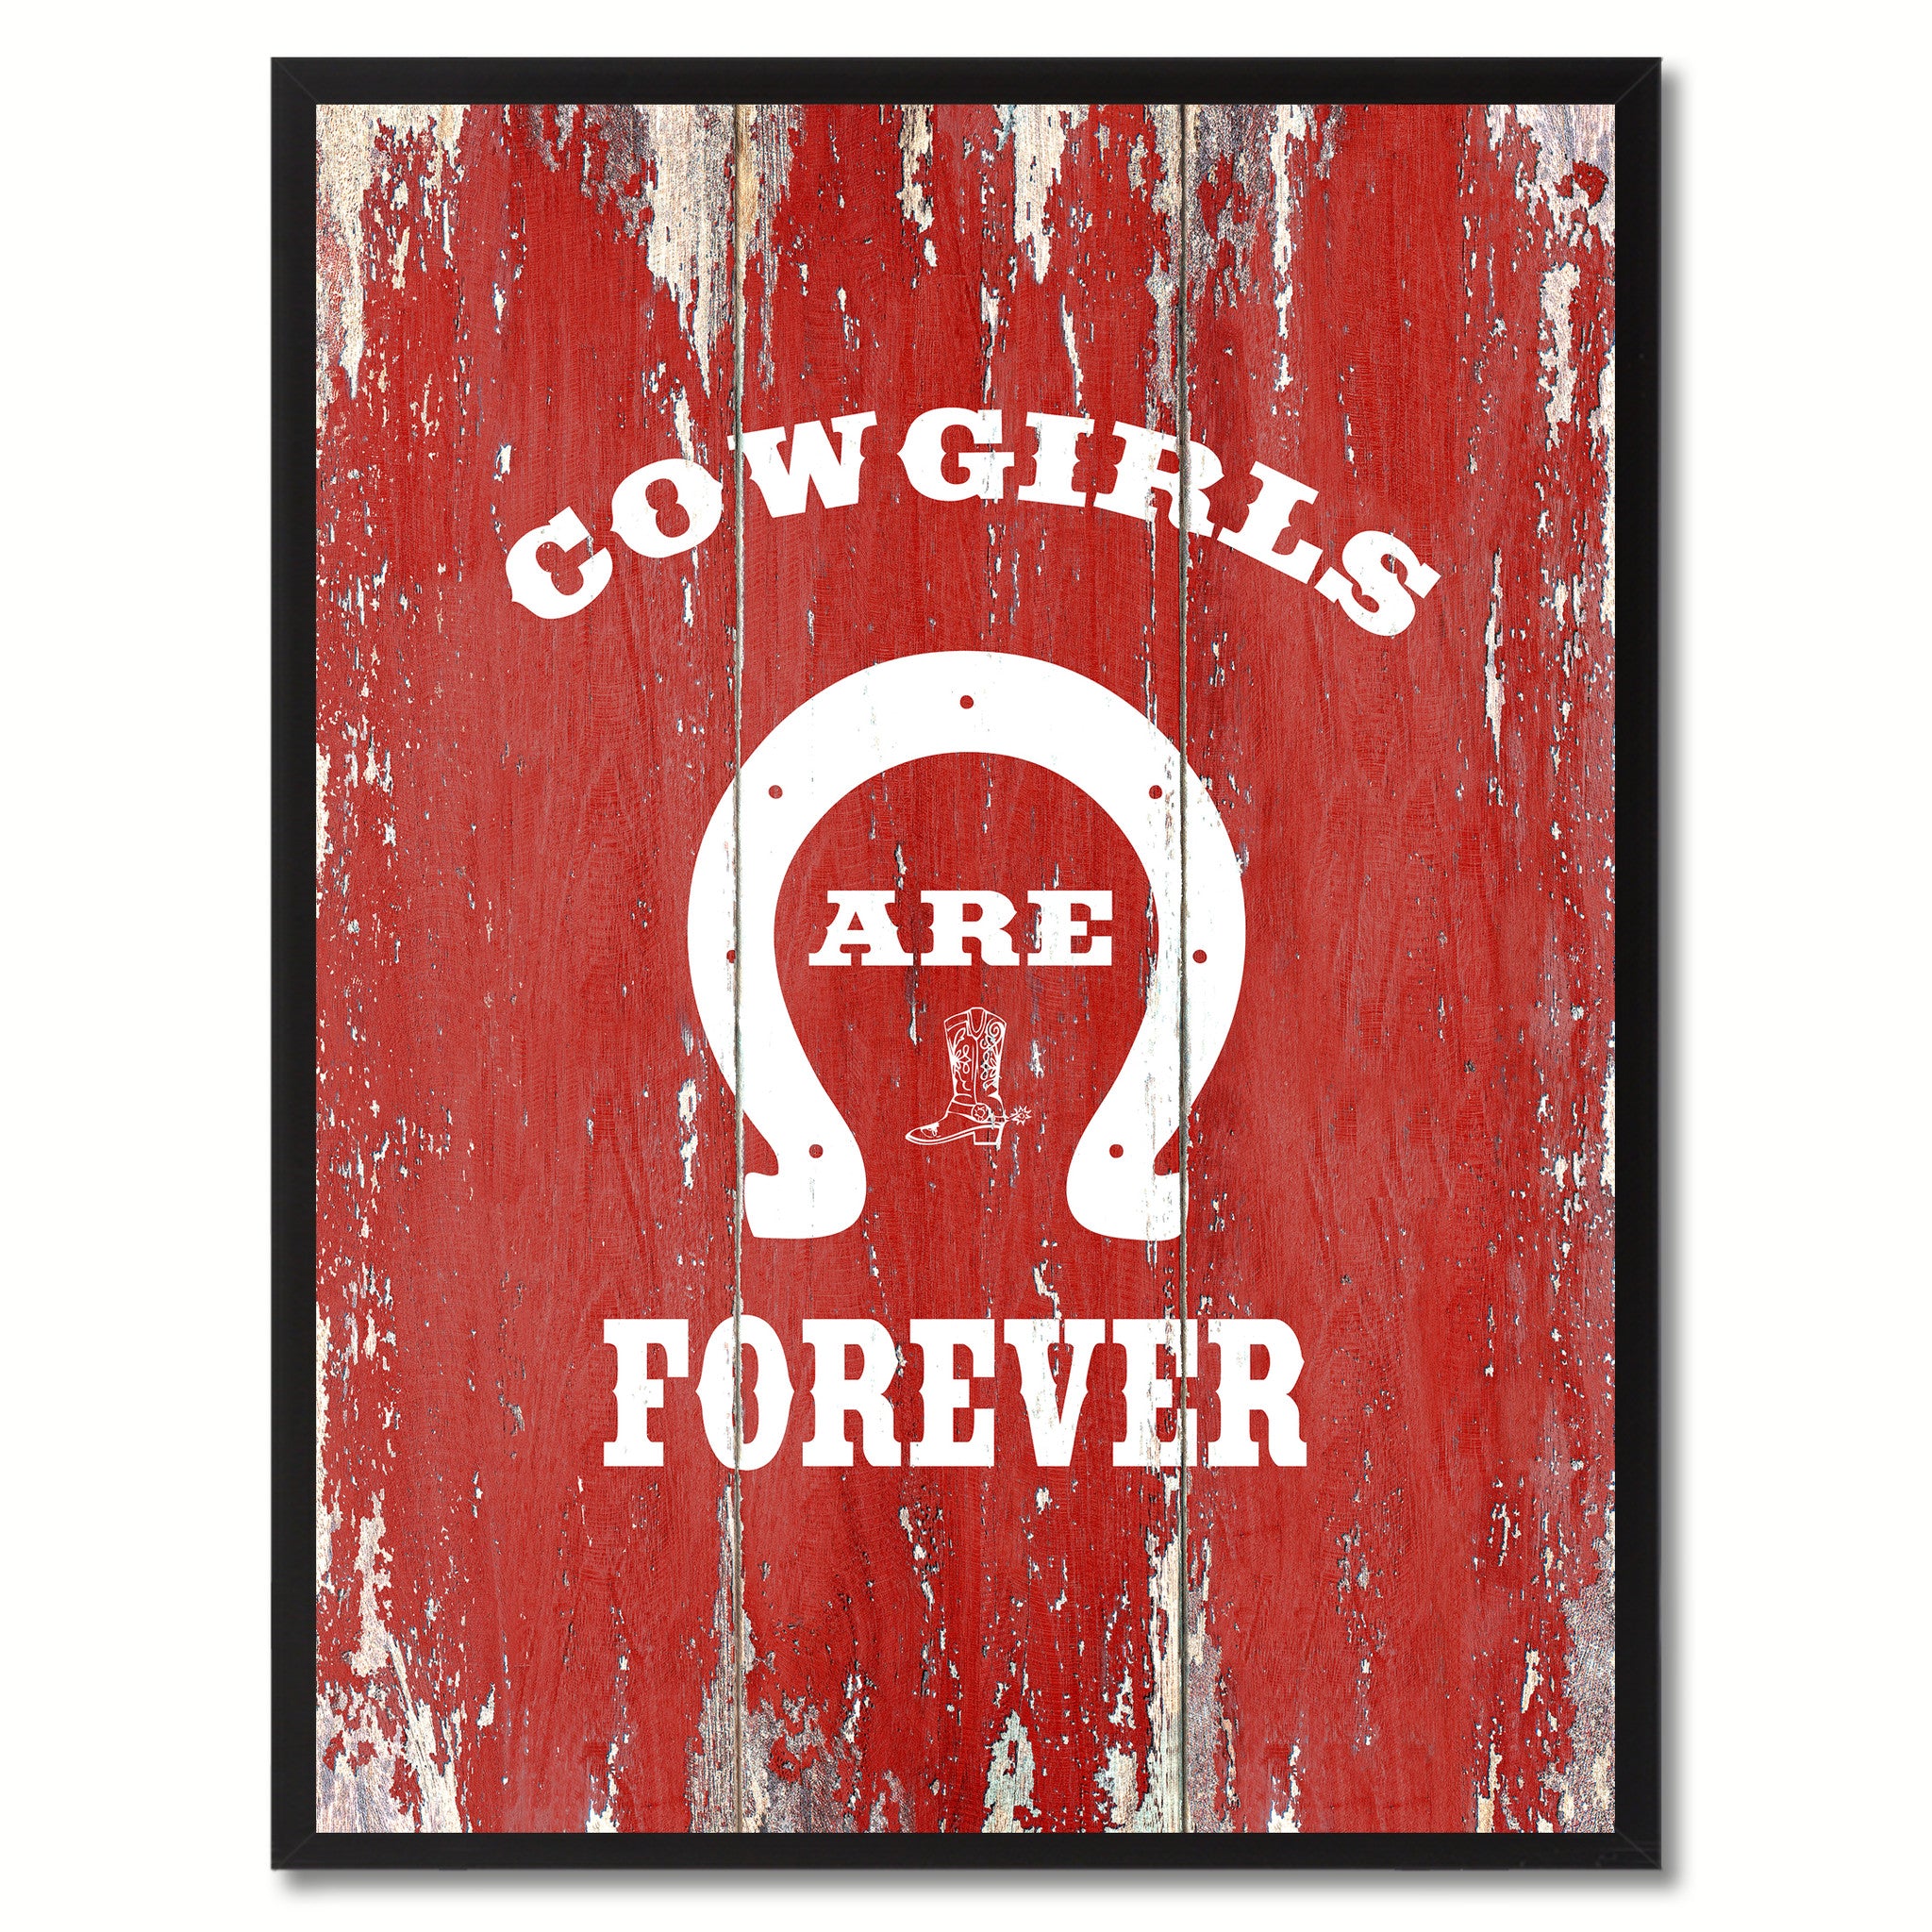 Cowgirls Are Forever Saying Canvas Print, Black Picture Frame Home Decor Wall Art Gifts